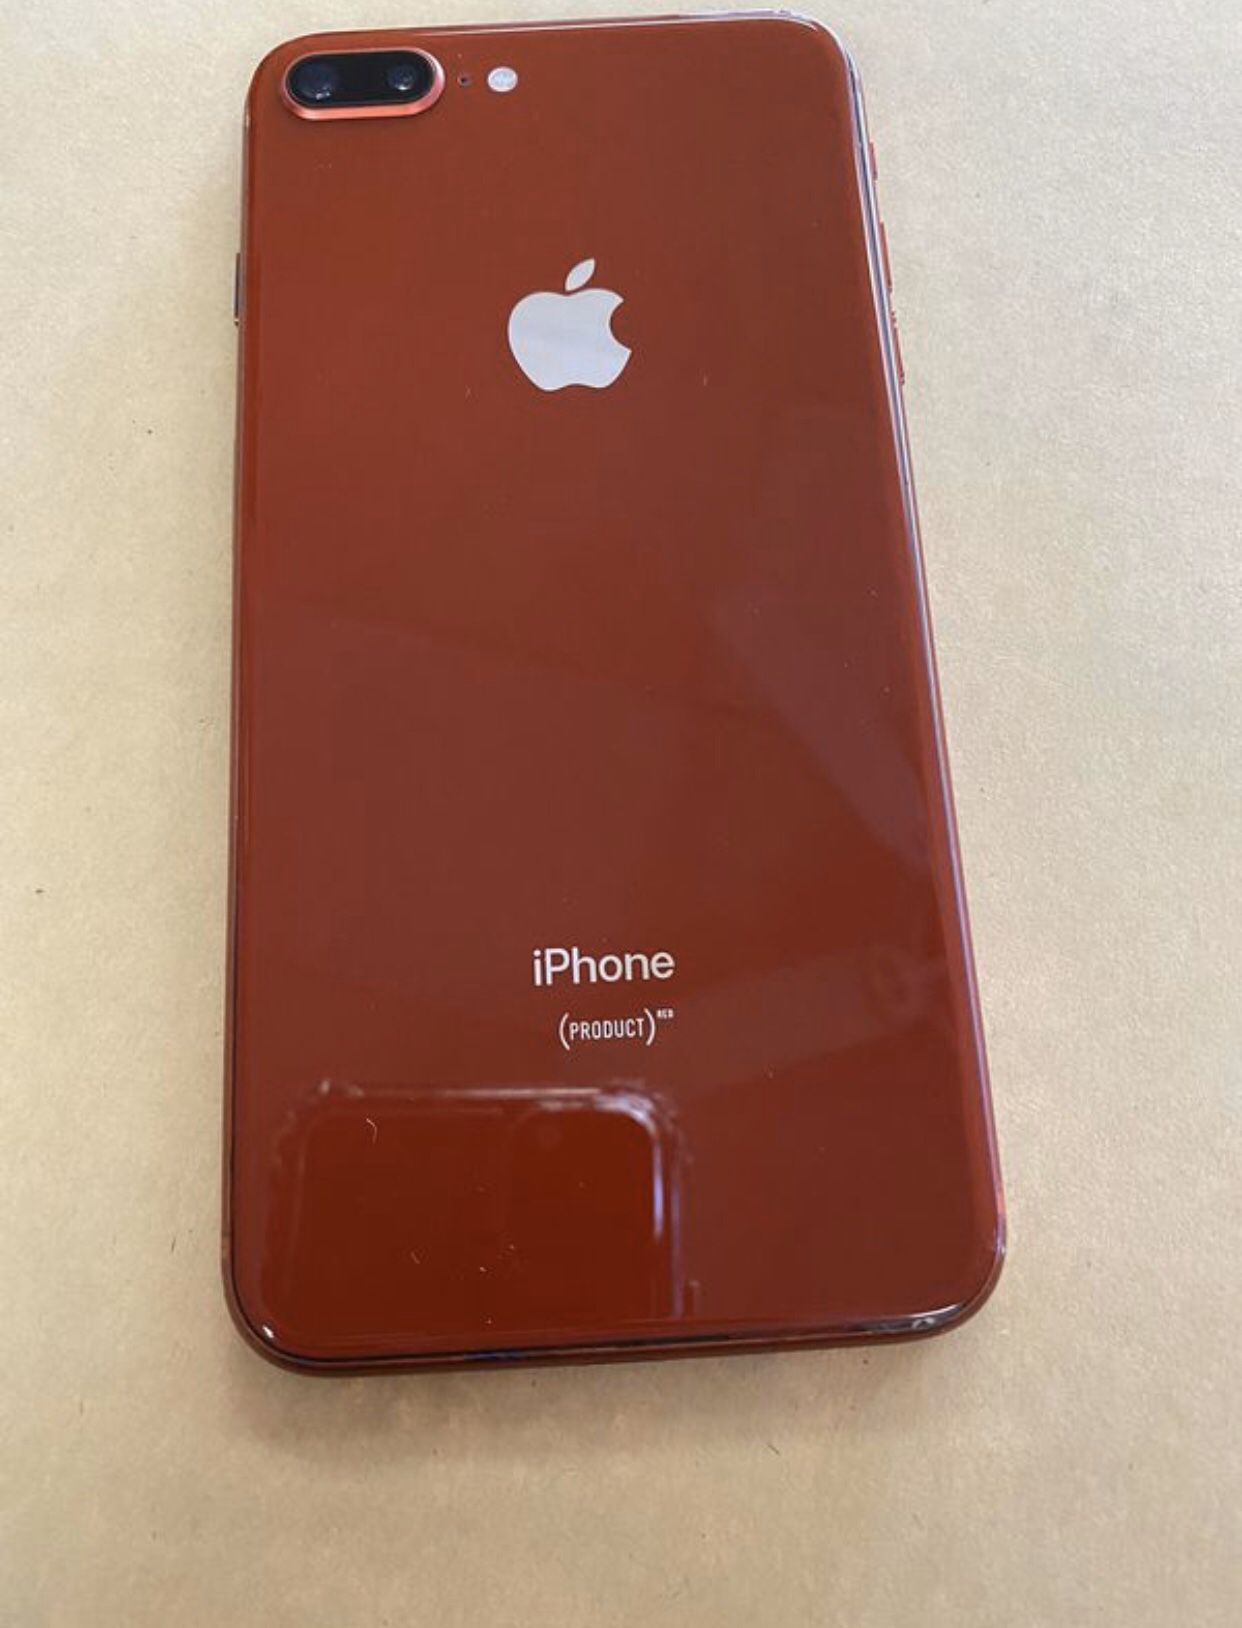 iPhone 8 Plus red 64gb for boost mobile or sprint,great overall condition.